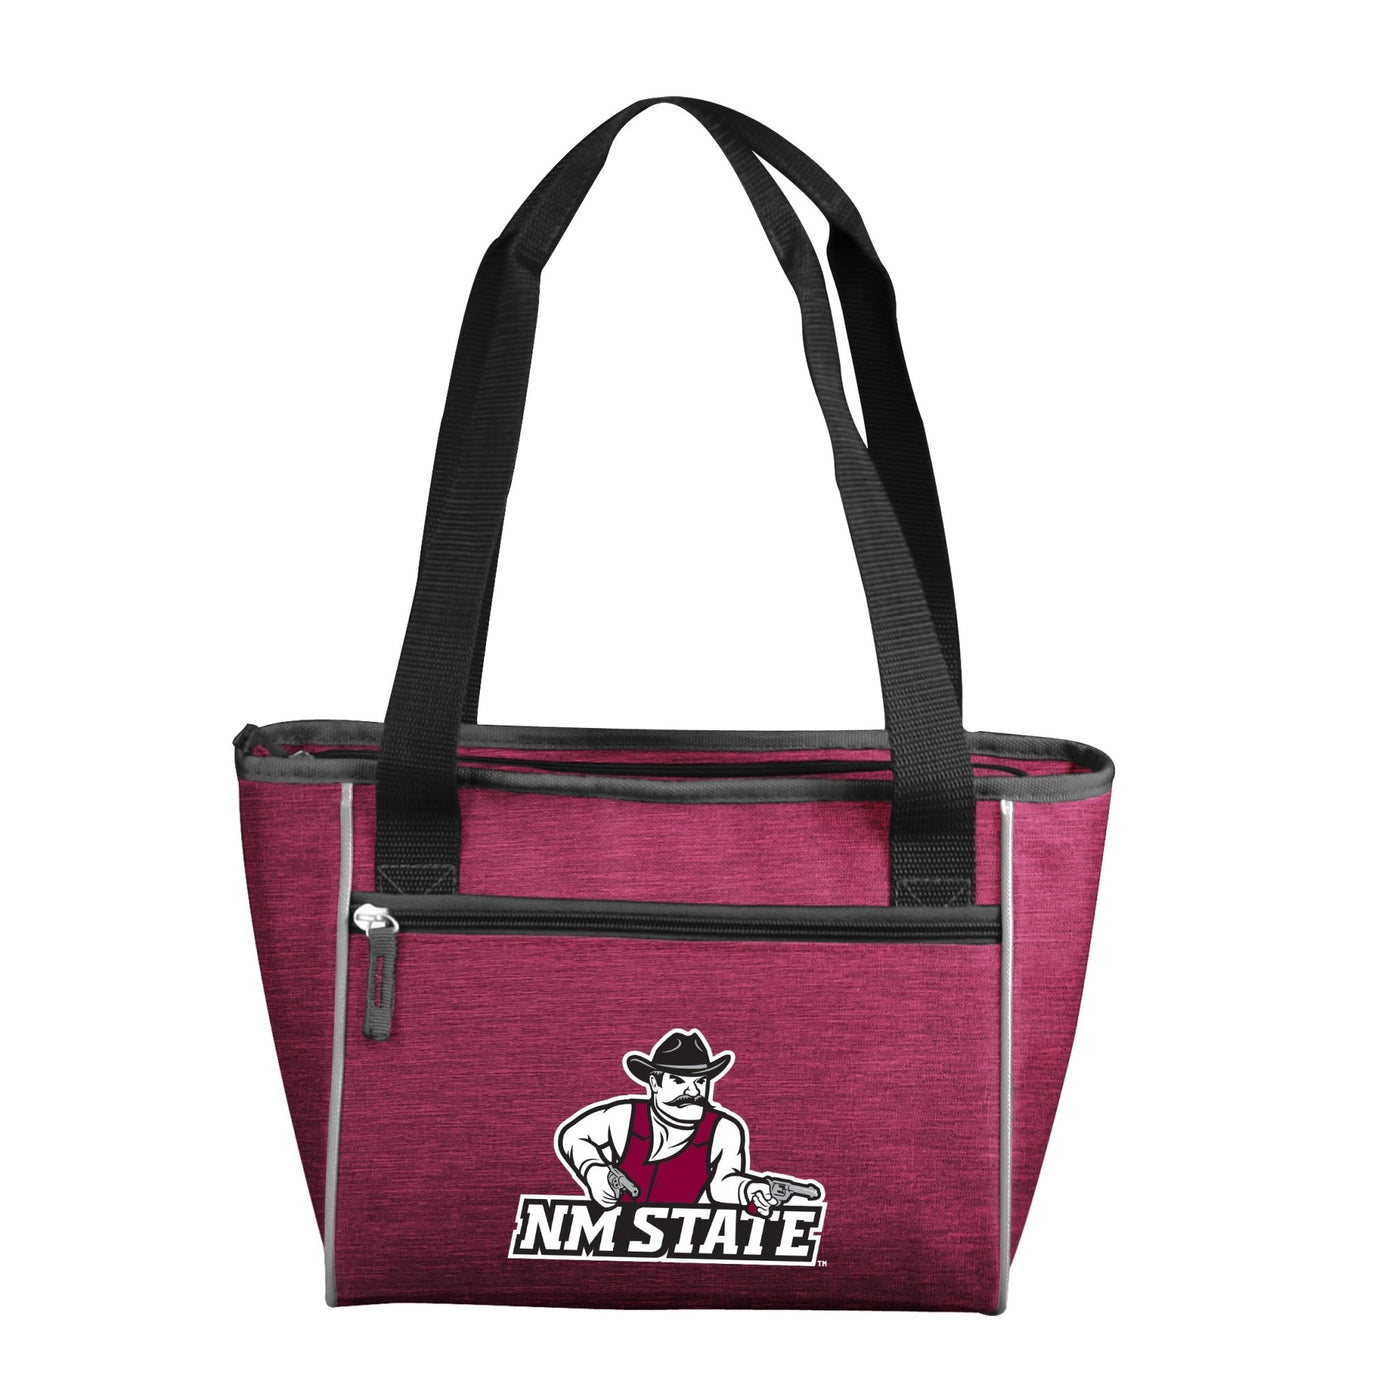 NM State Crosshatch 16 Can Cooler Tote - Logo Brands